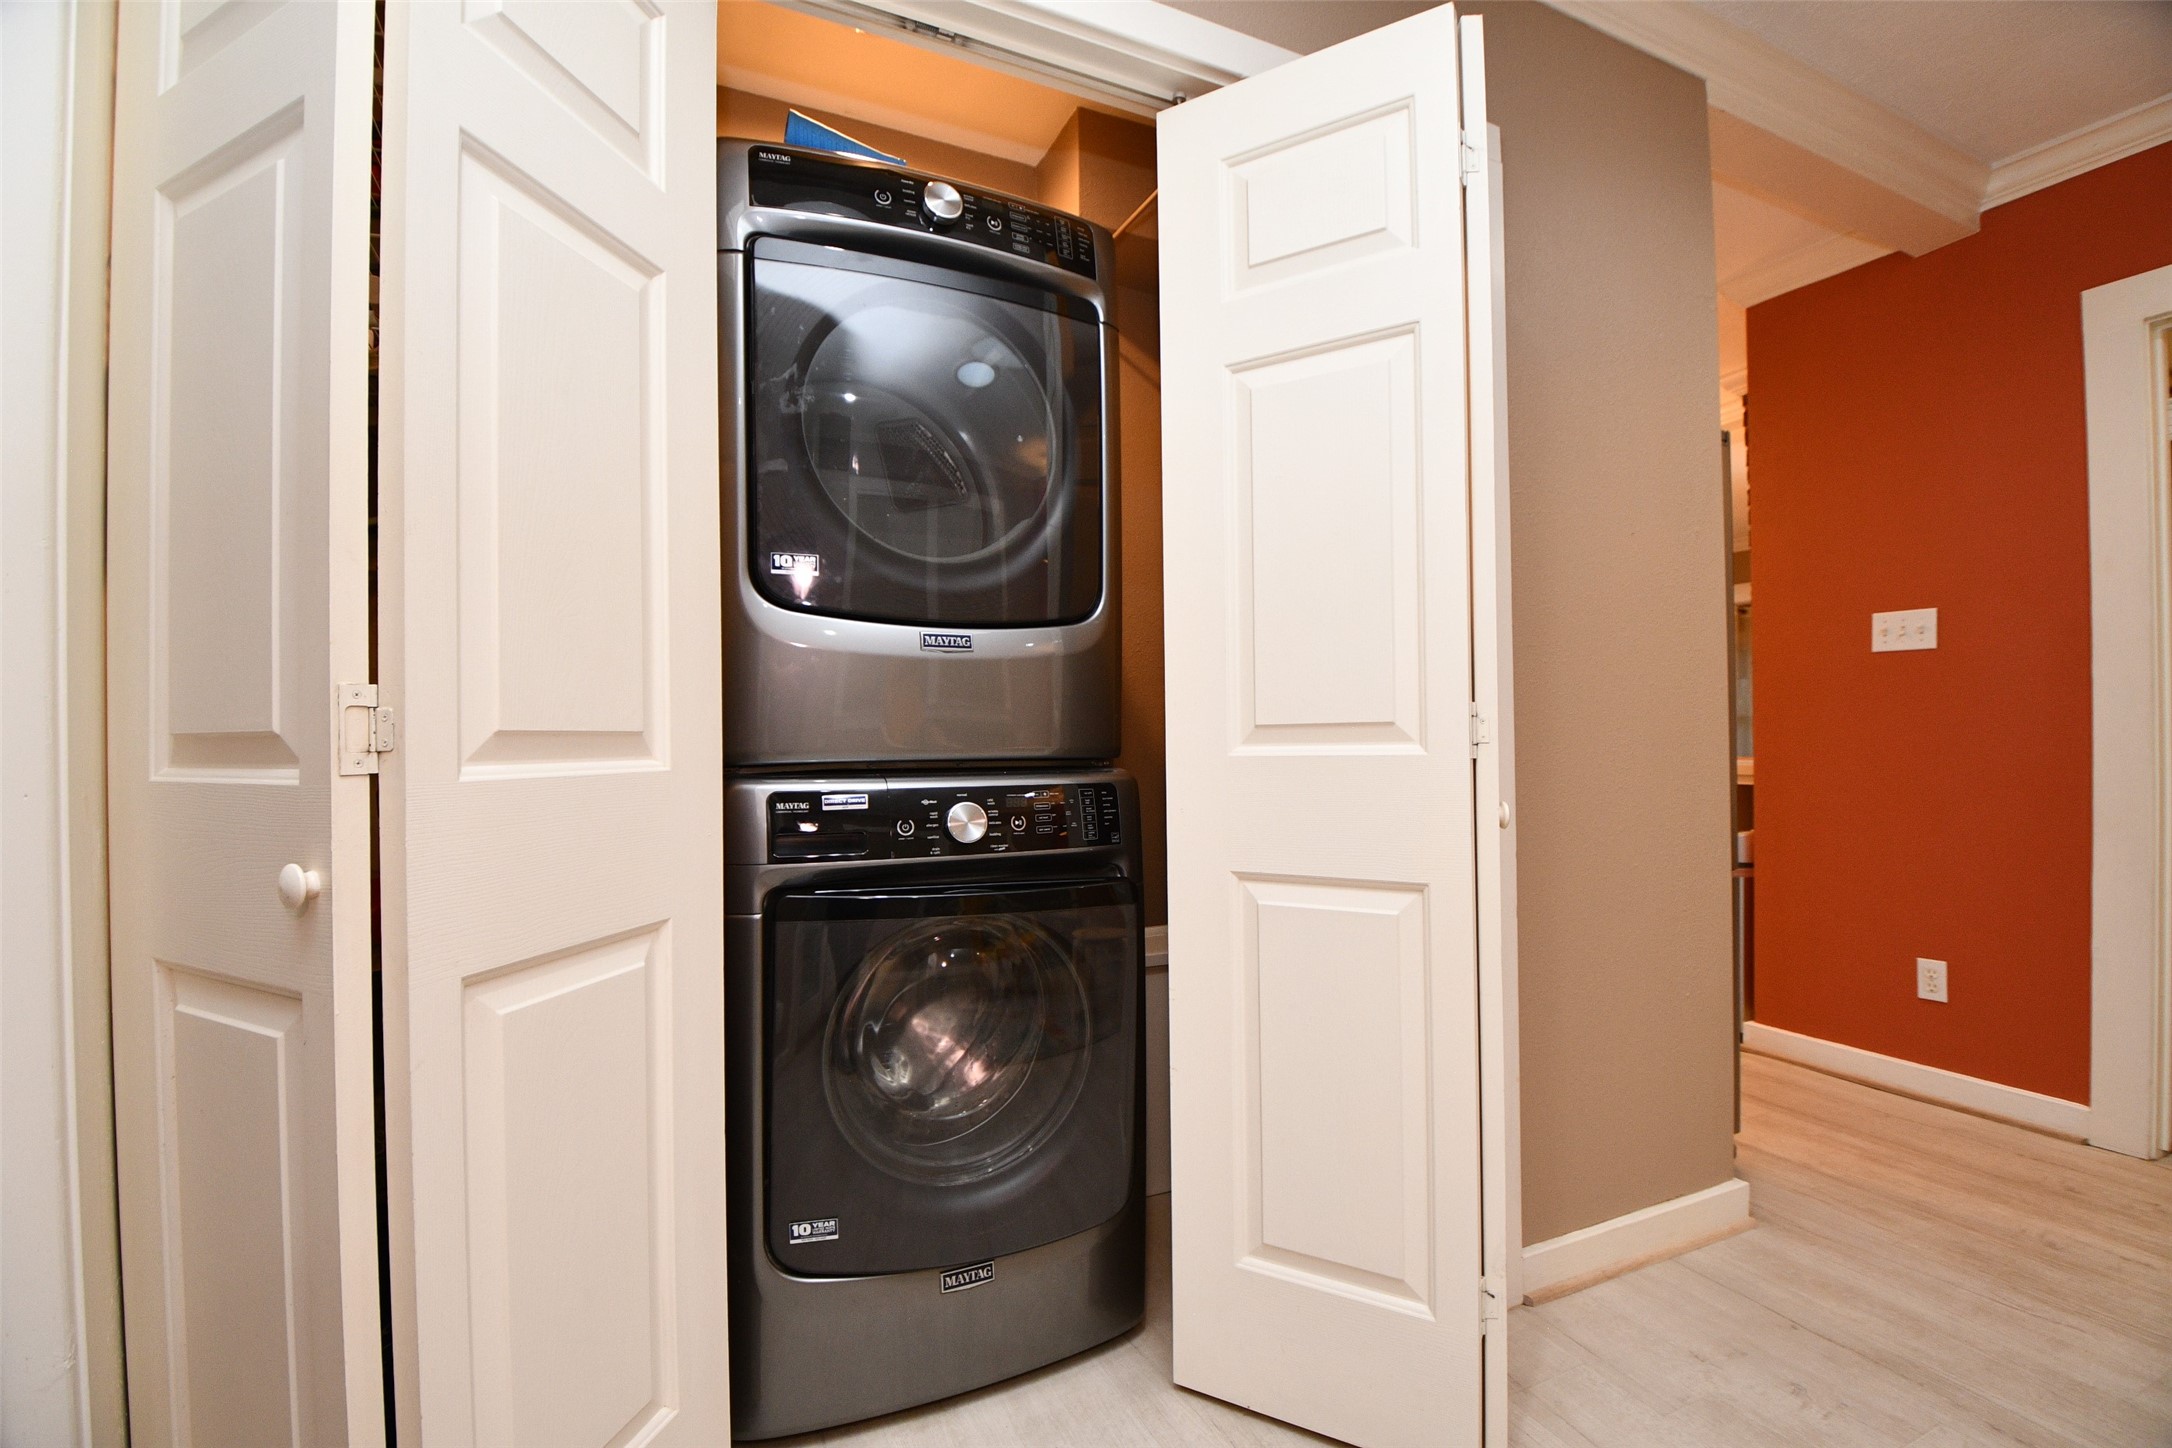 The large utility closet includes this washer and dryer set and is conveniently located next to the primary bedroom.